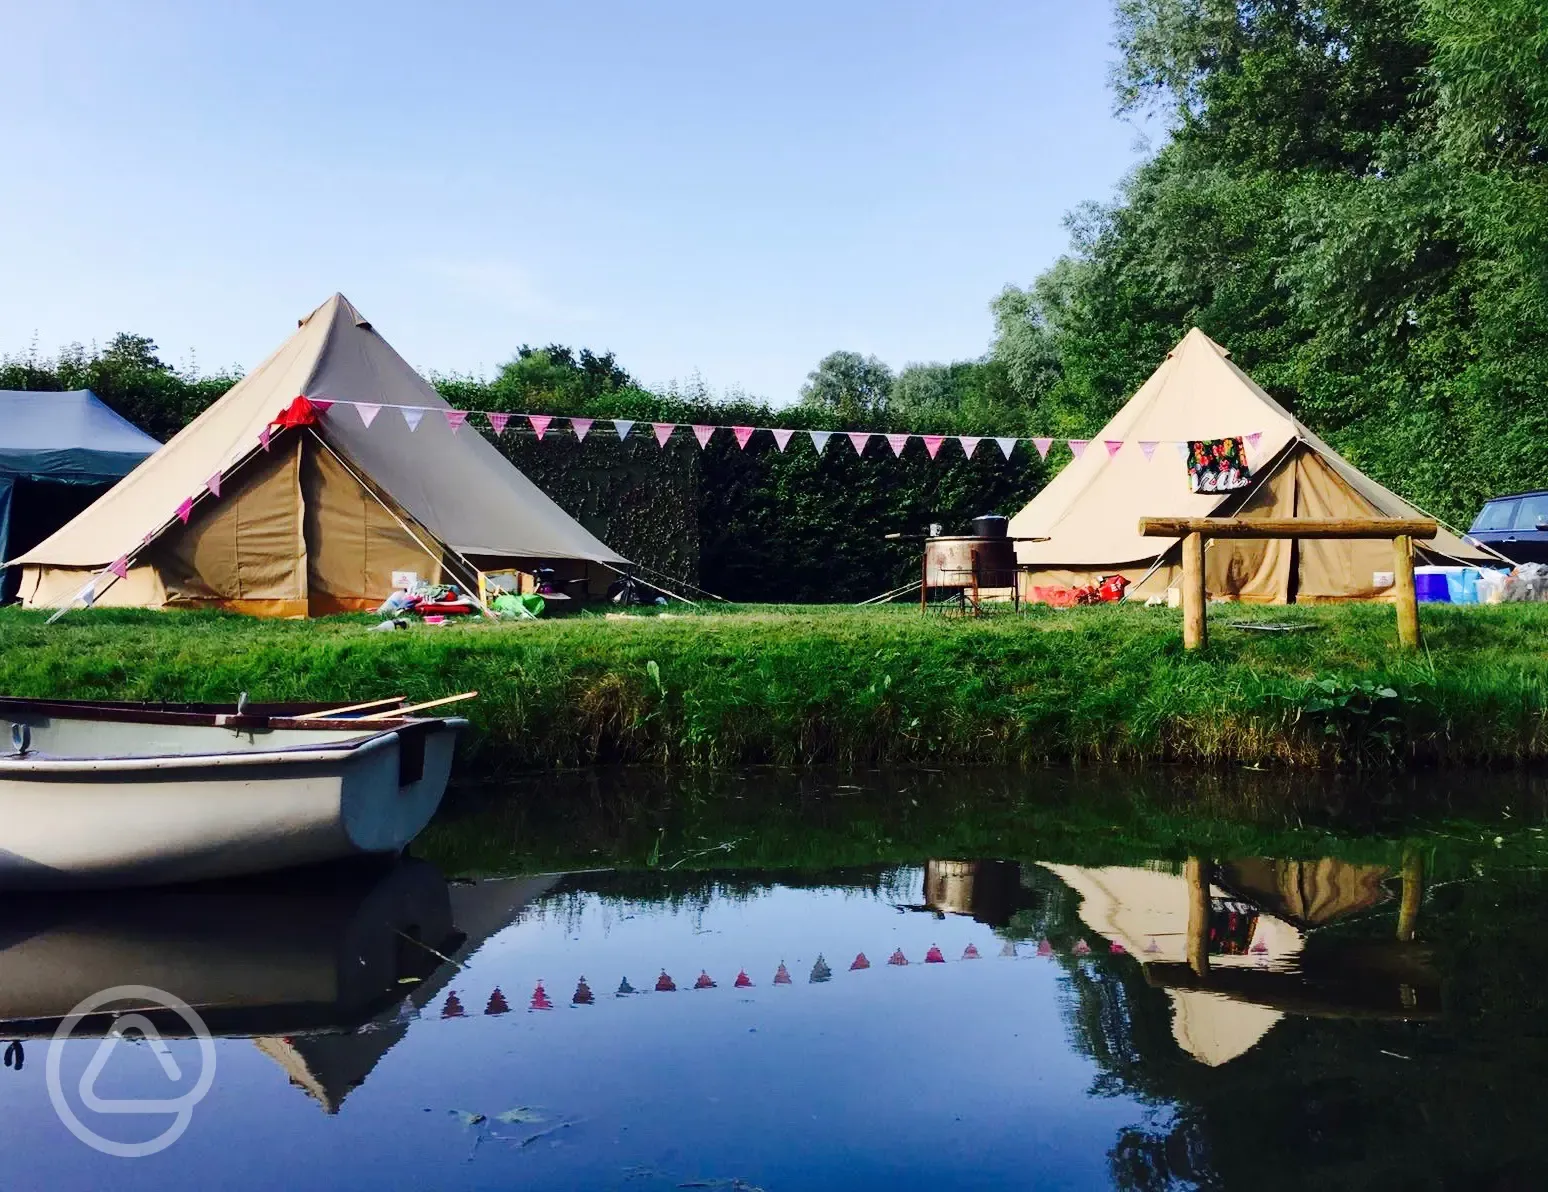 Hire a bell tent, pop your things inside, then relax!